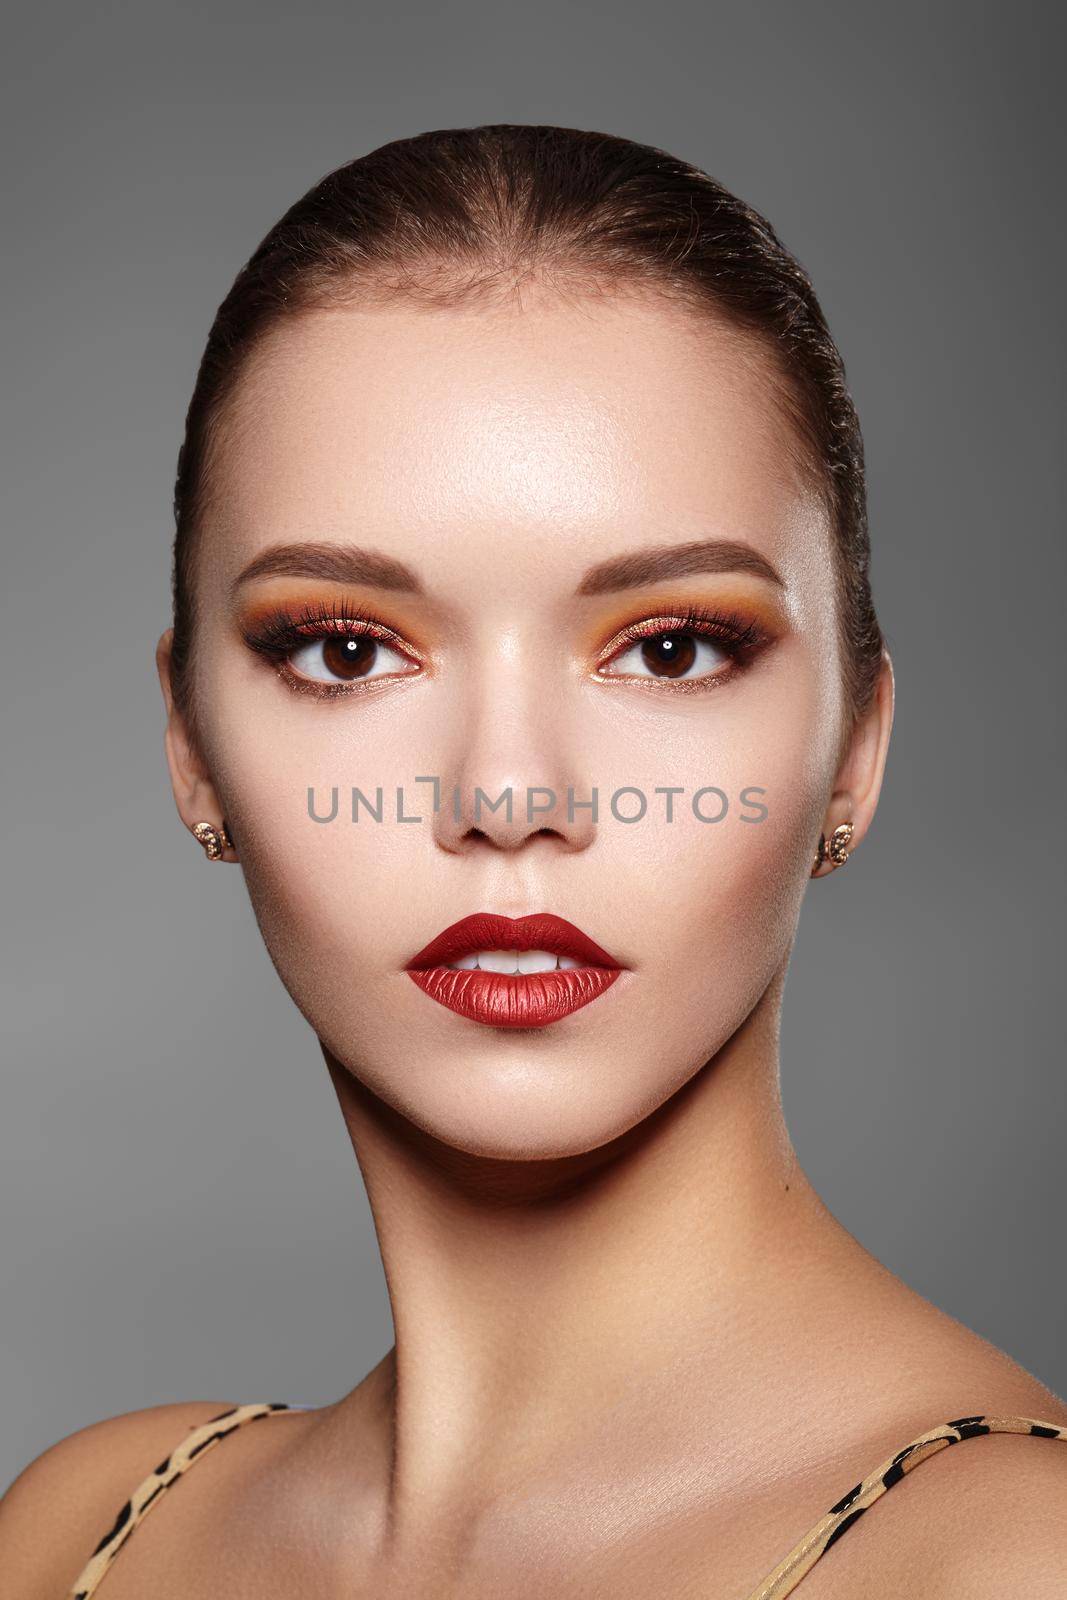 Beautiful Woman with Professional Makeup. Party Gold Eye Make-up, Perfect Eyebrows, Shine Skin. Bright Fashion Look with Red Lips